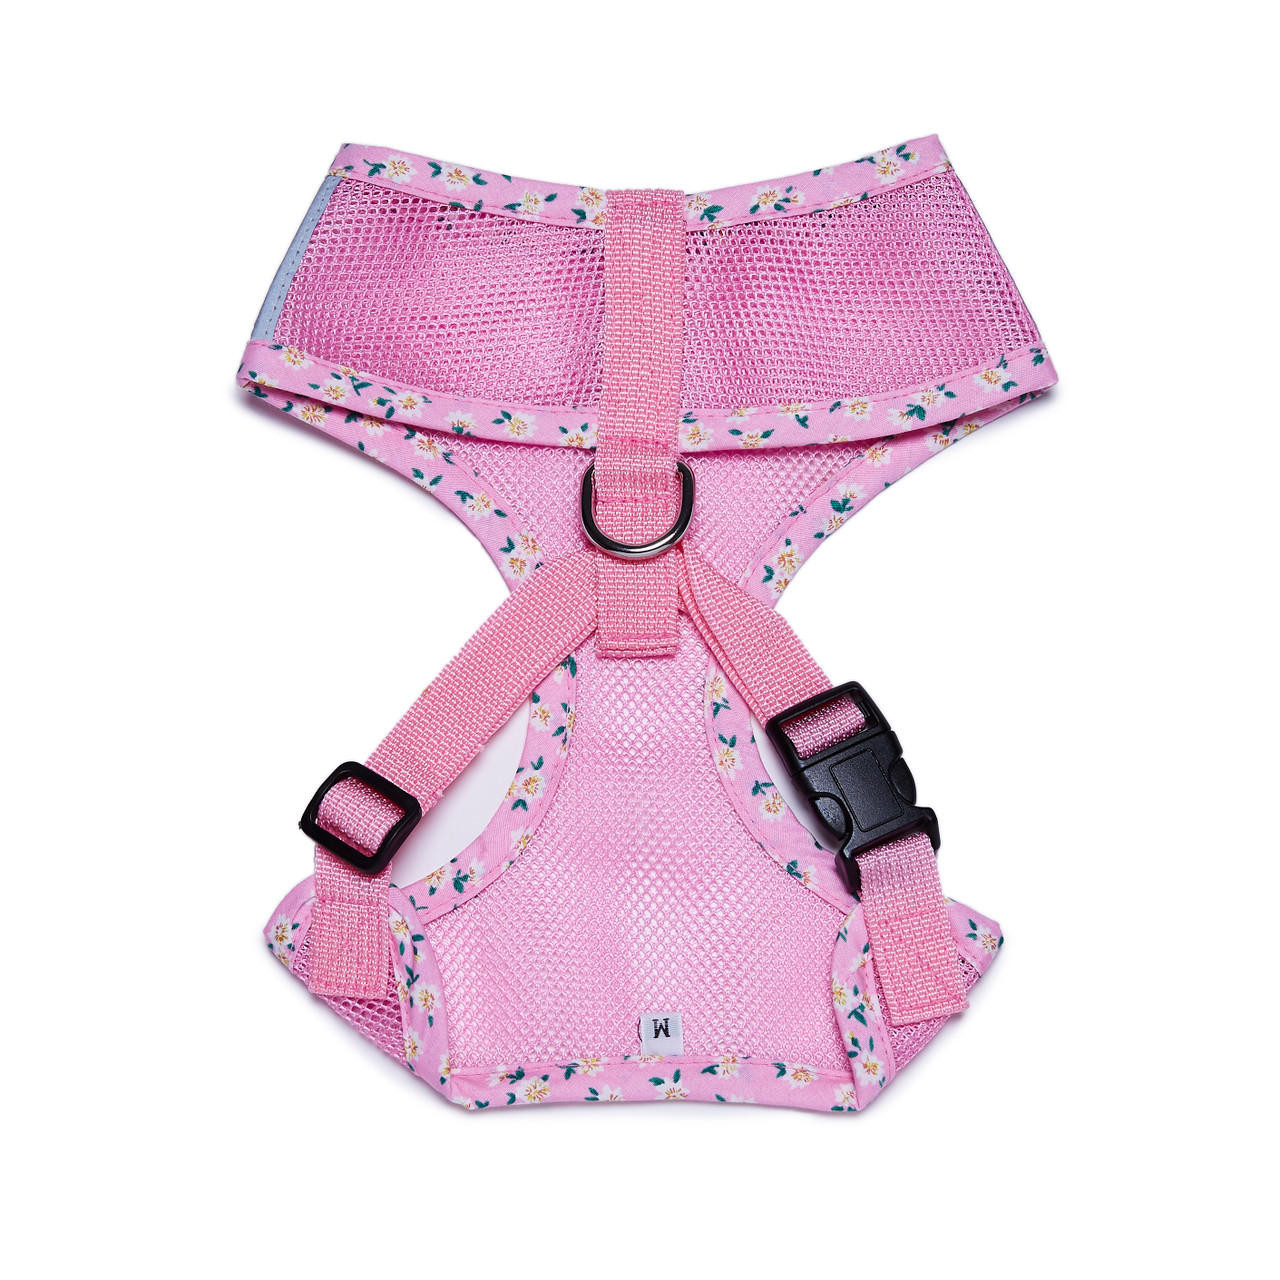  NYD Open Mesh Classic Style Harness-FINAL SALE 